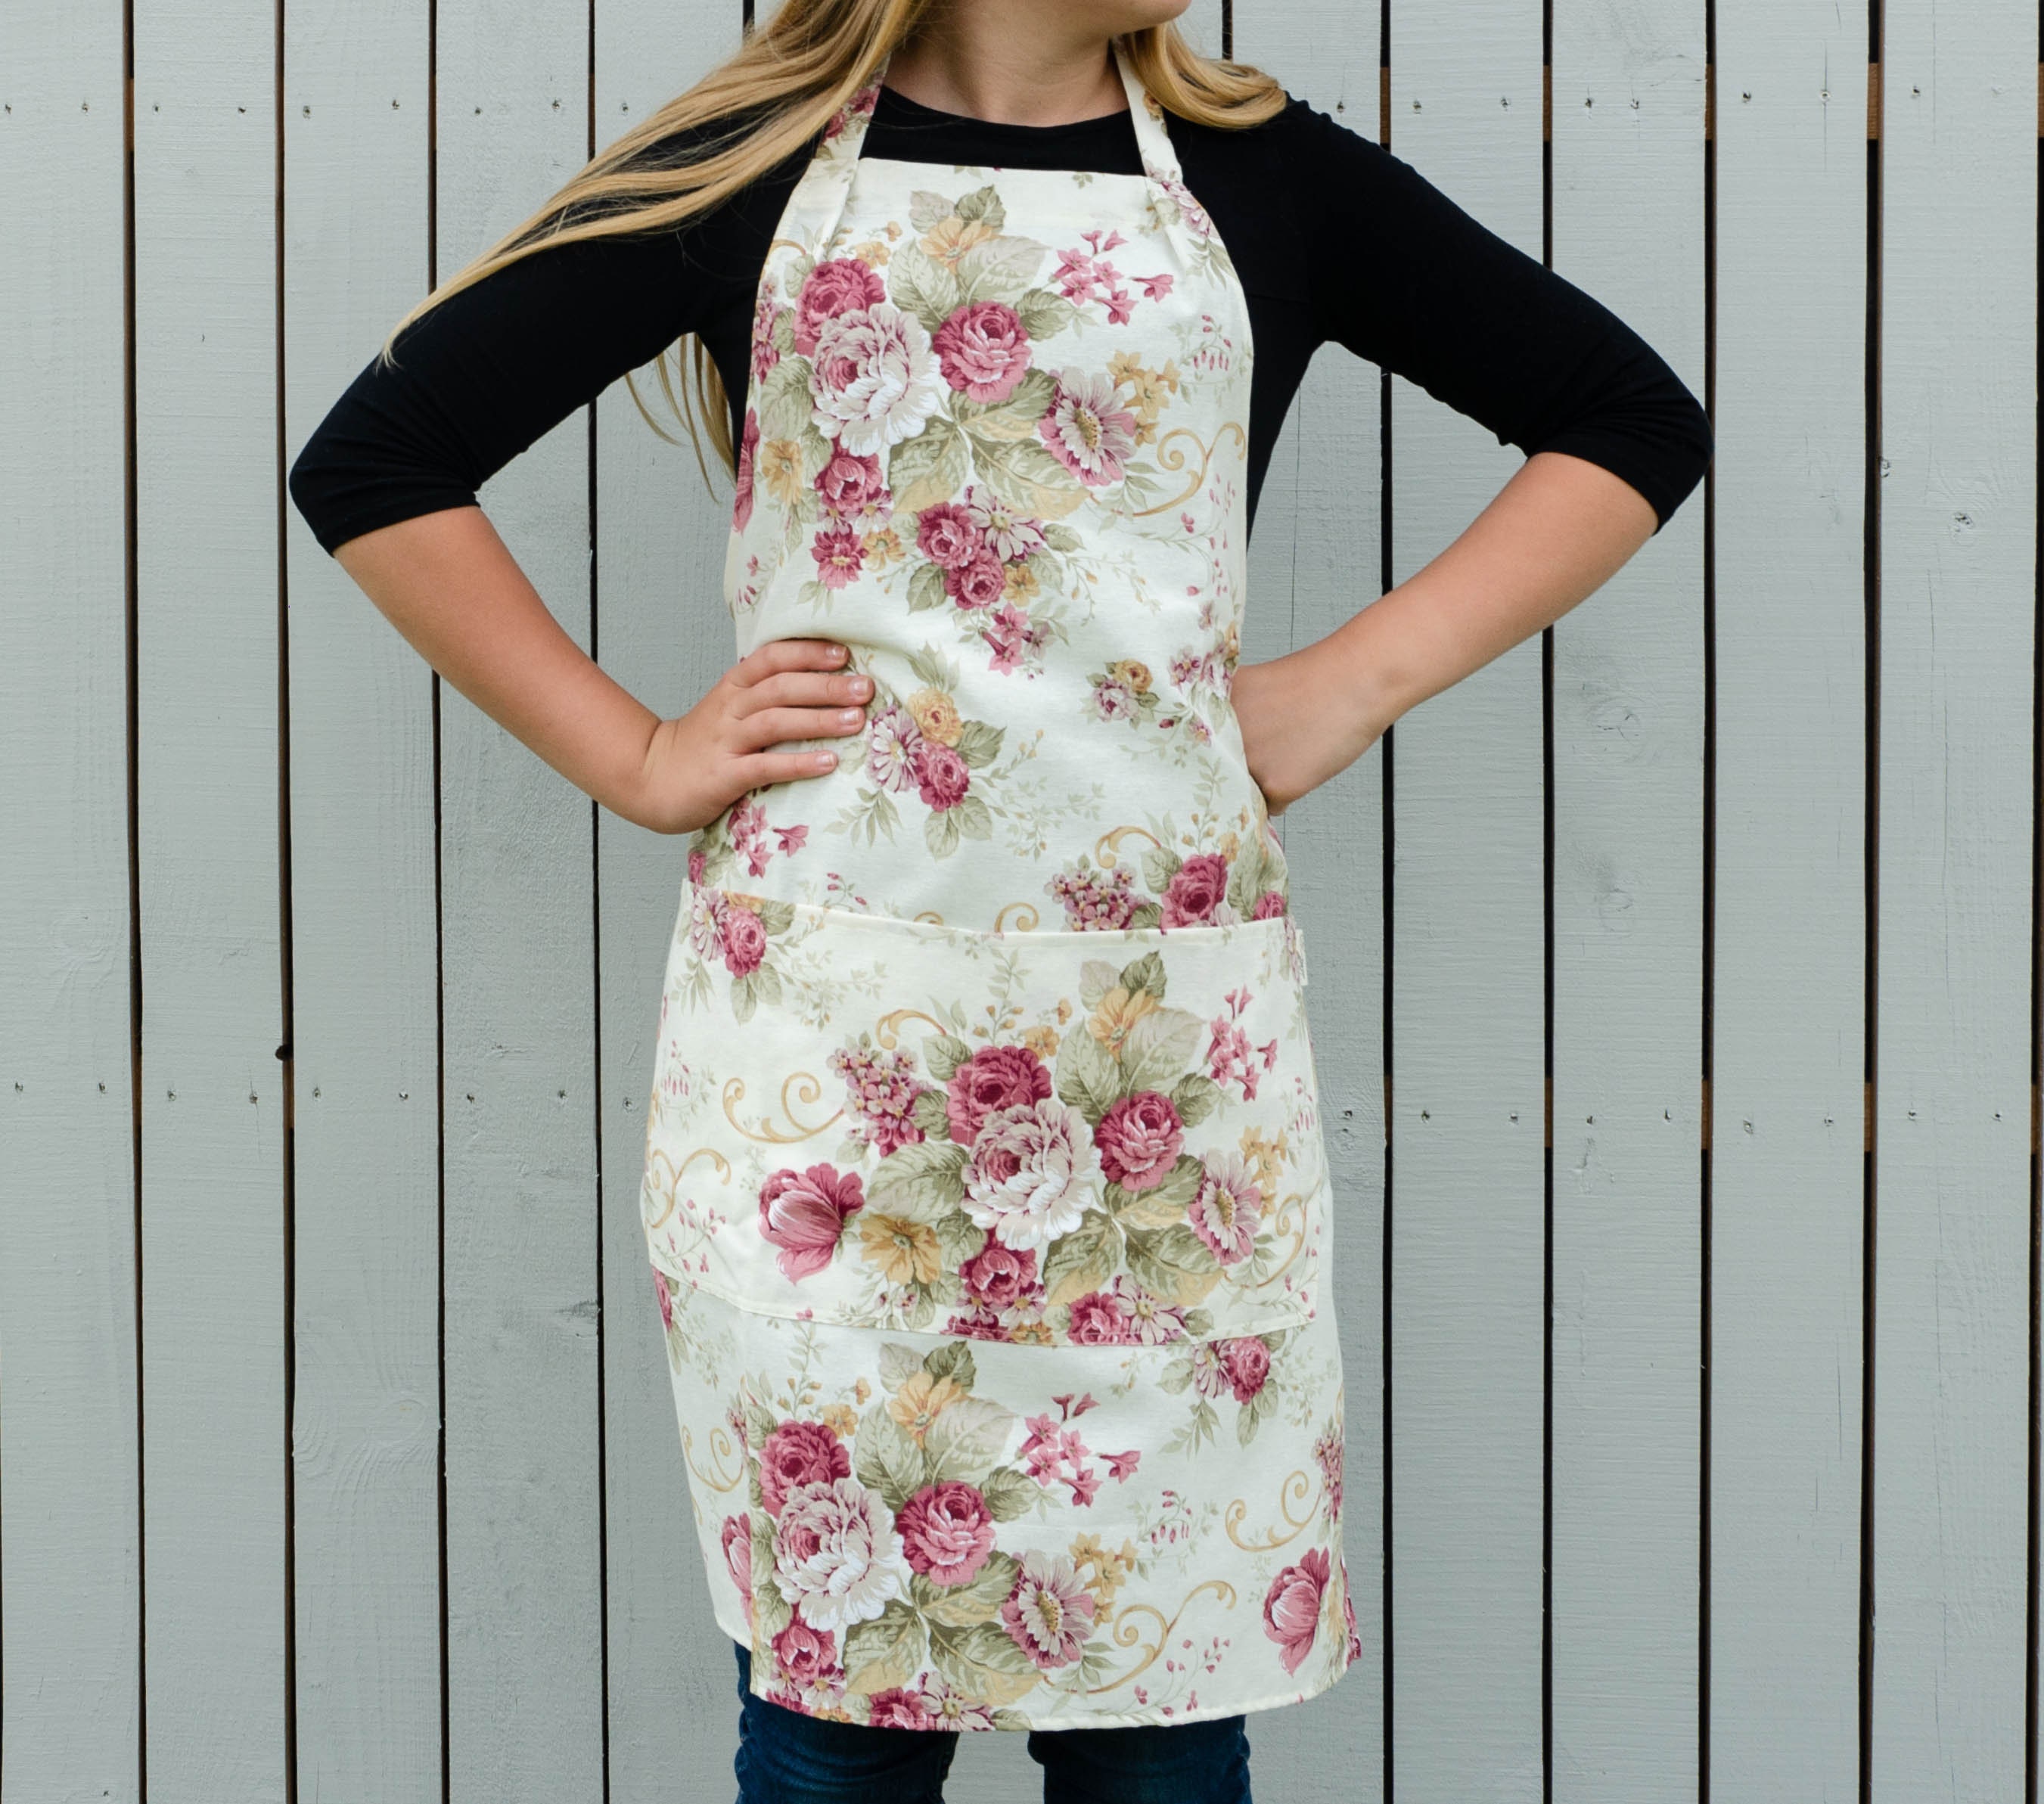 Aprons for Women. Roses Print Floral Apron for Woman With Pockets